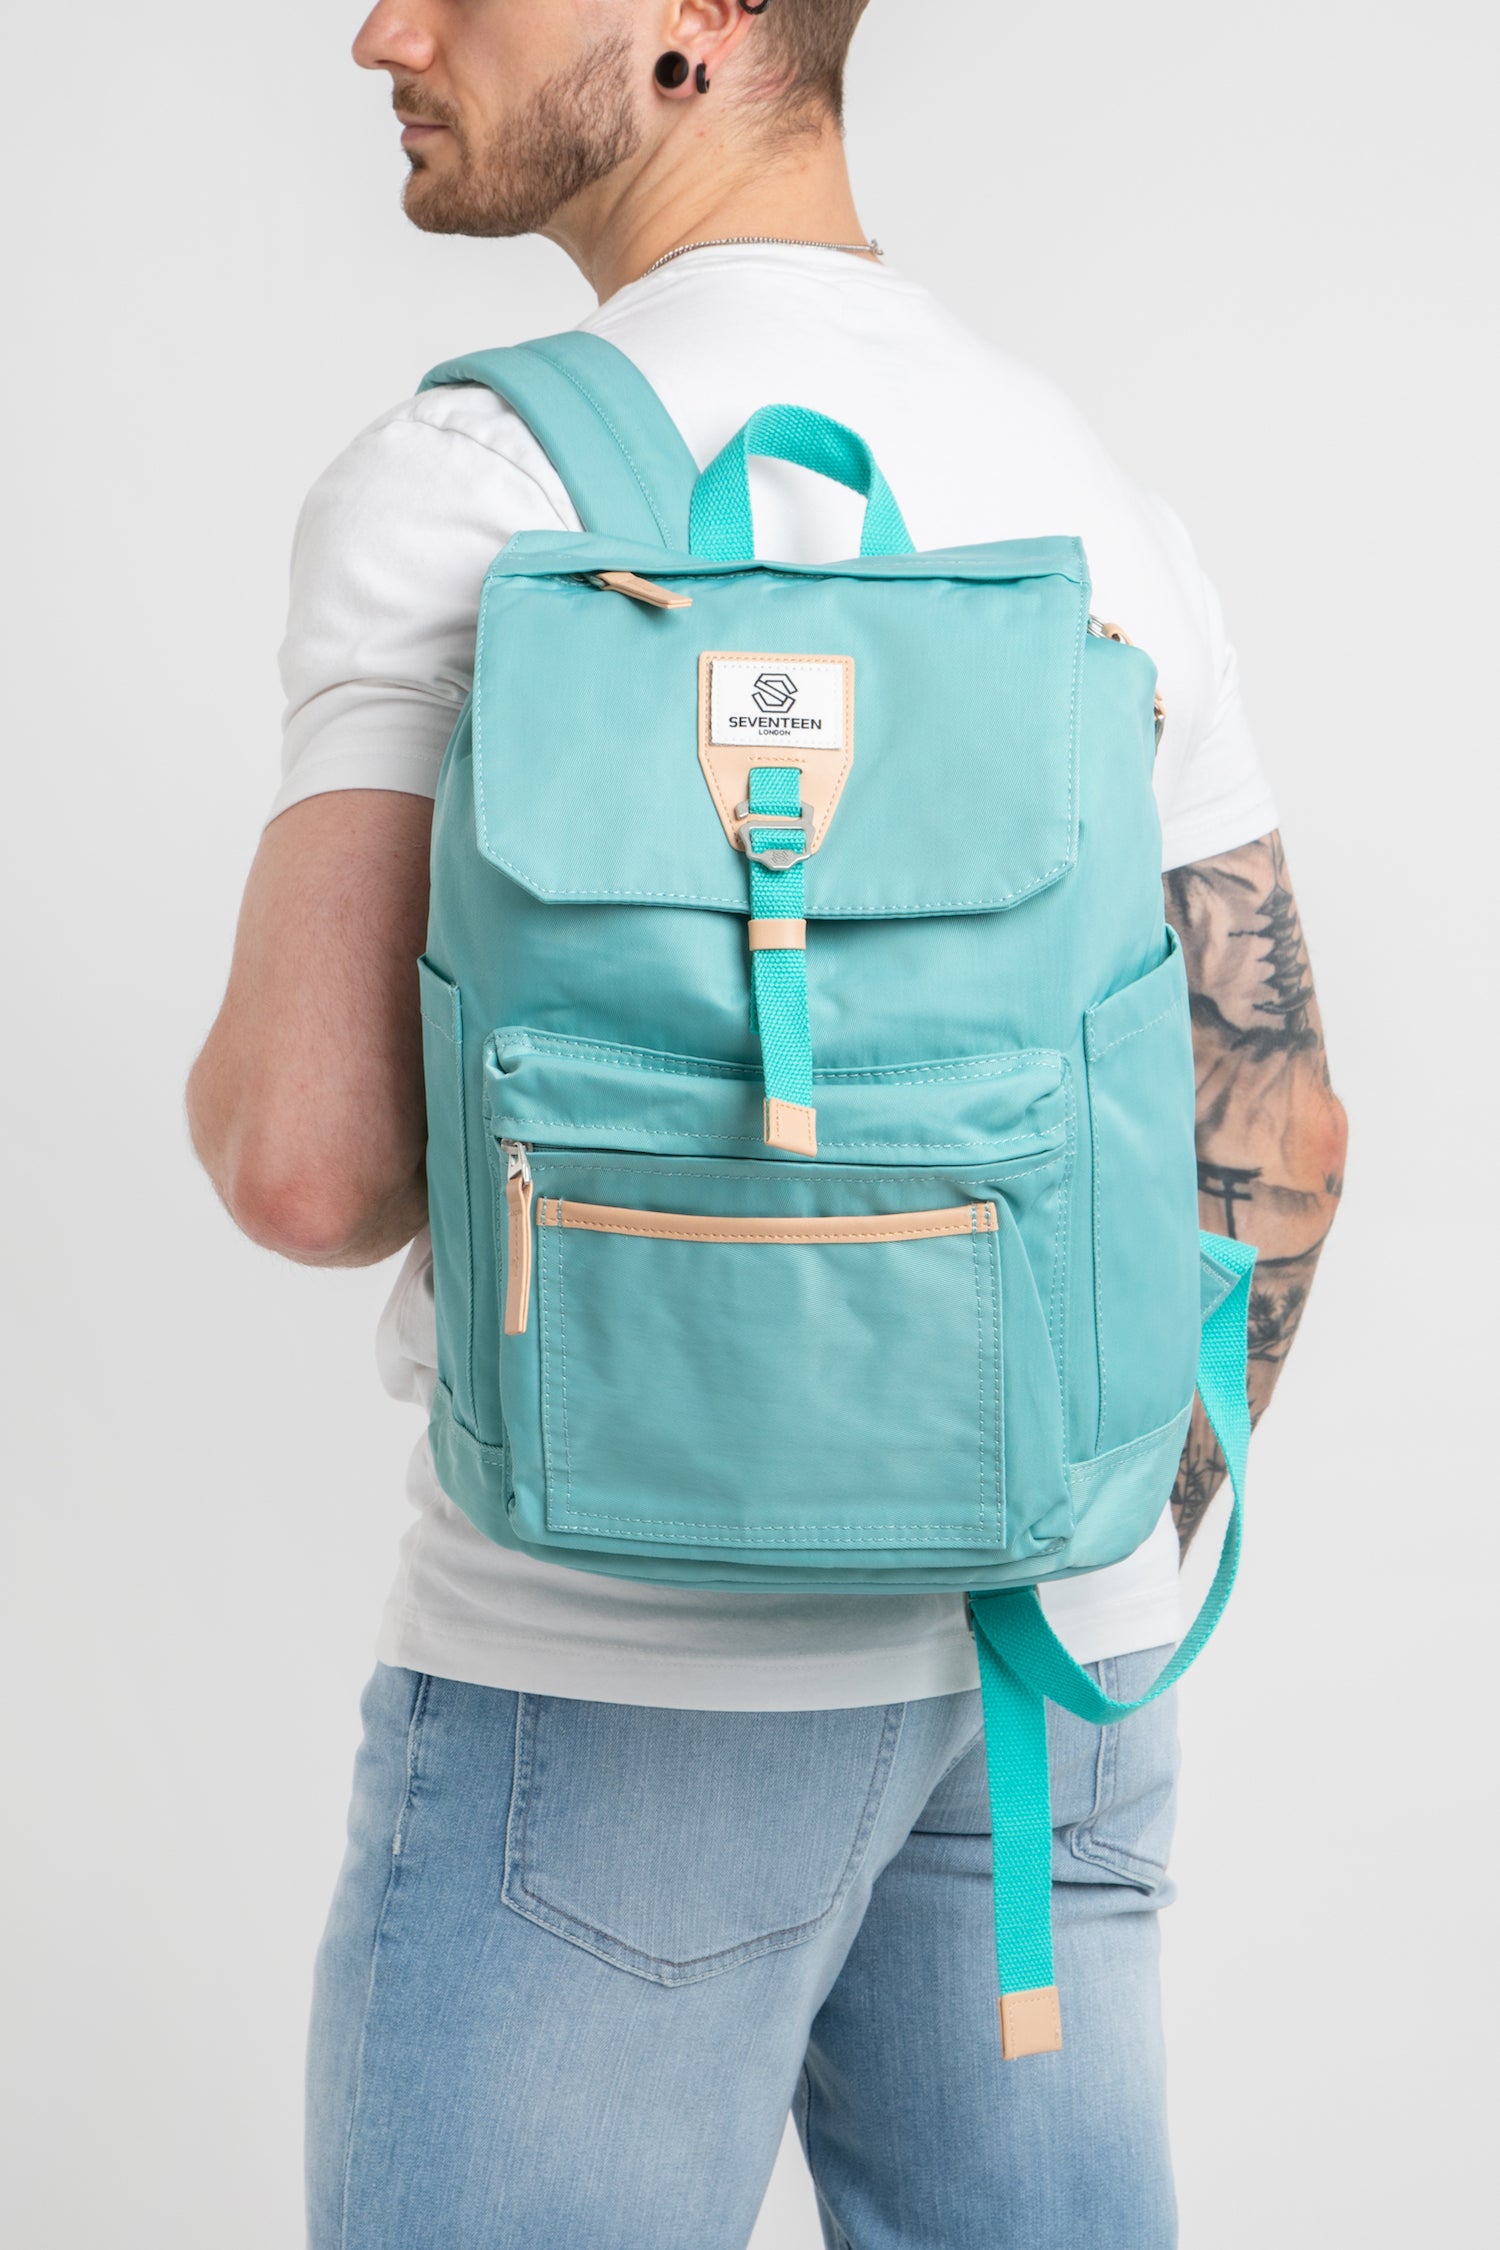 Fulham Backpack - Turquoise